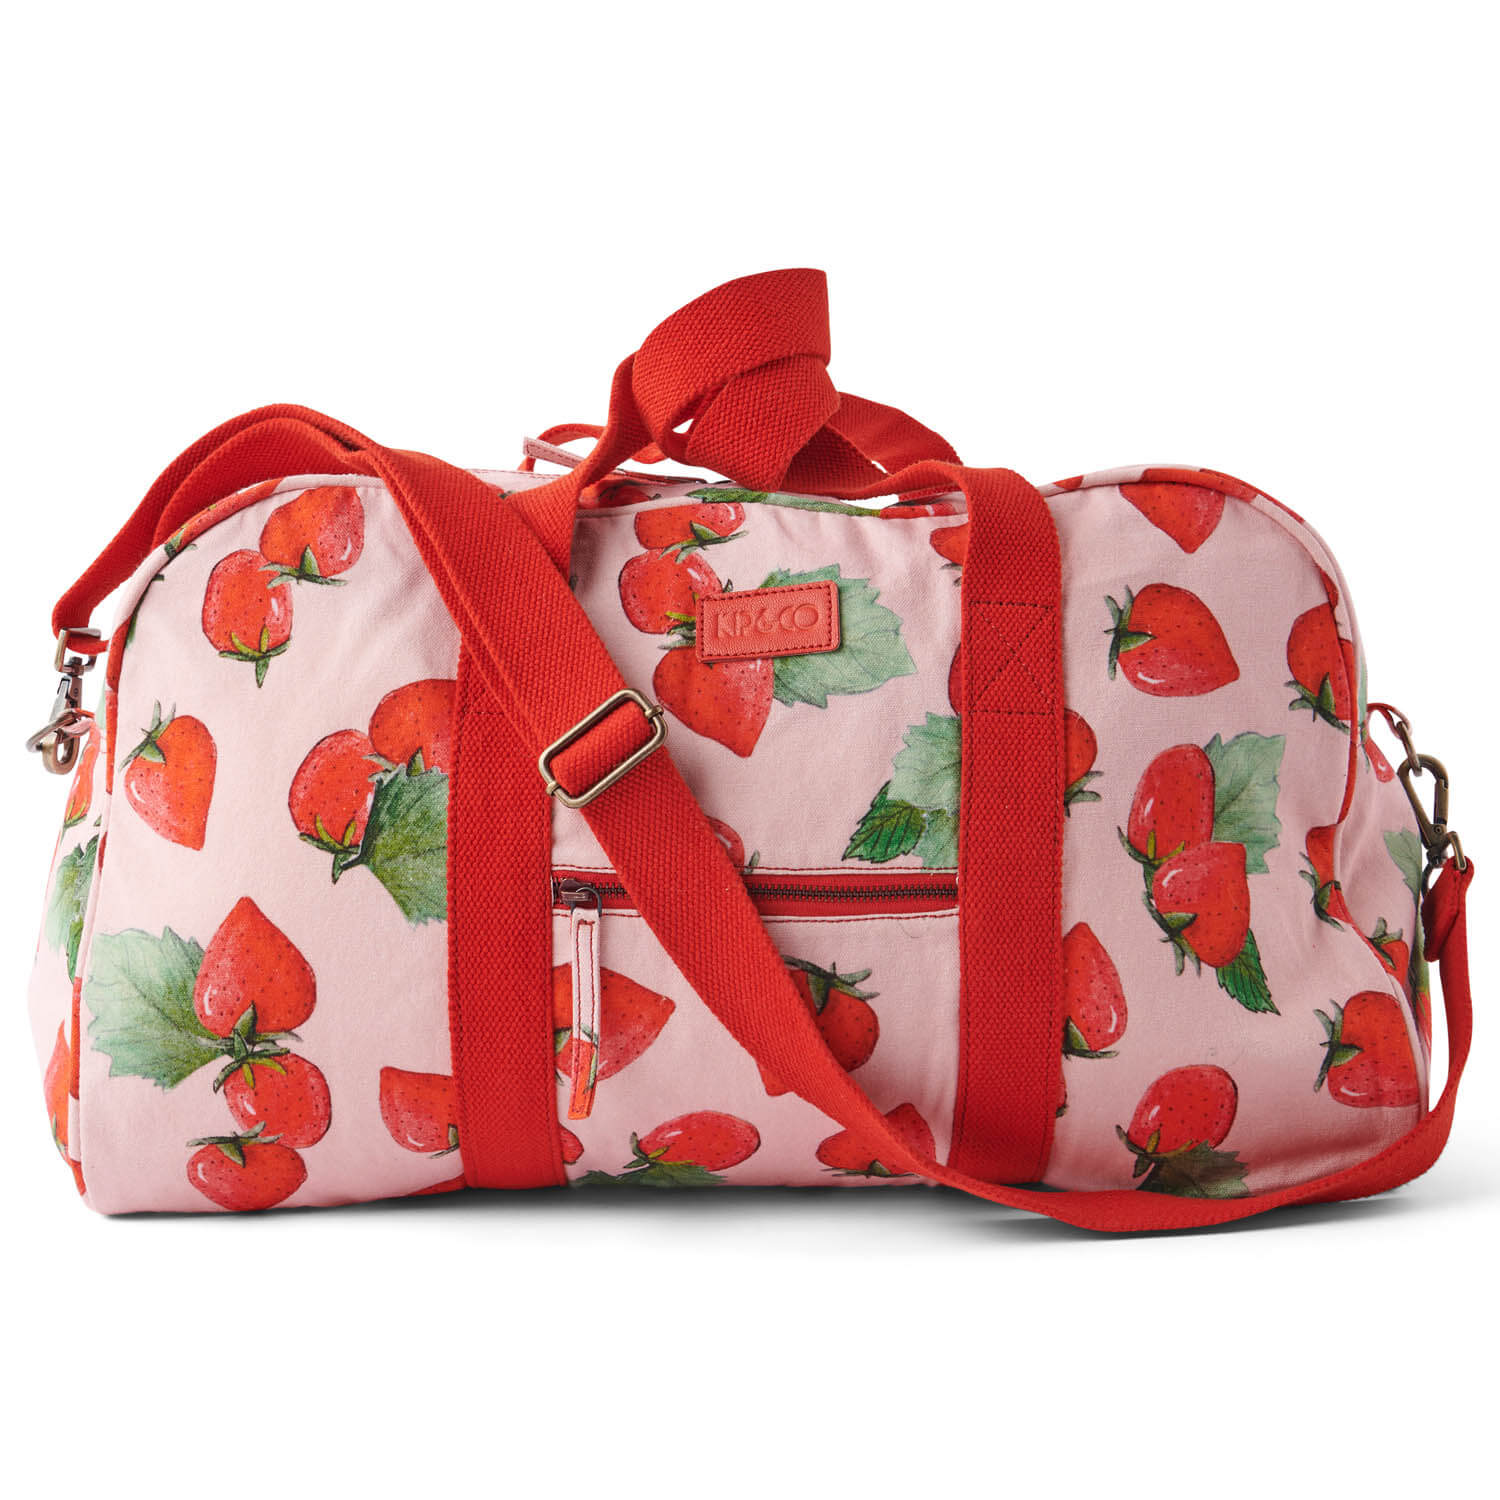 Kip and co Strawberry delight duffle bag |The Home Maven